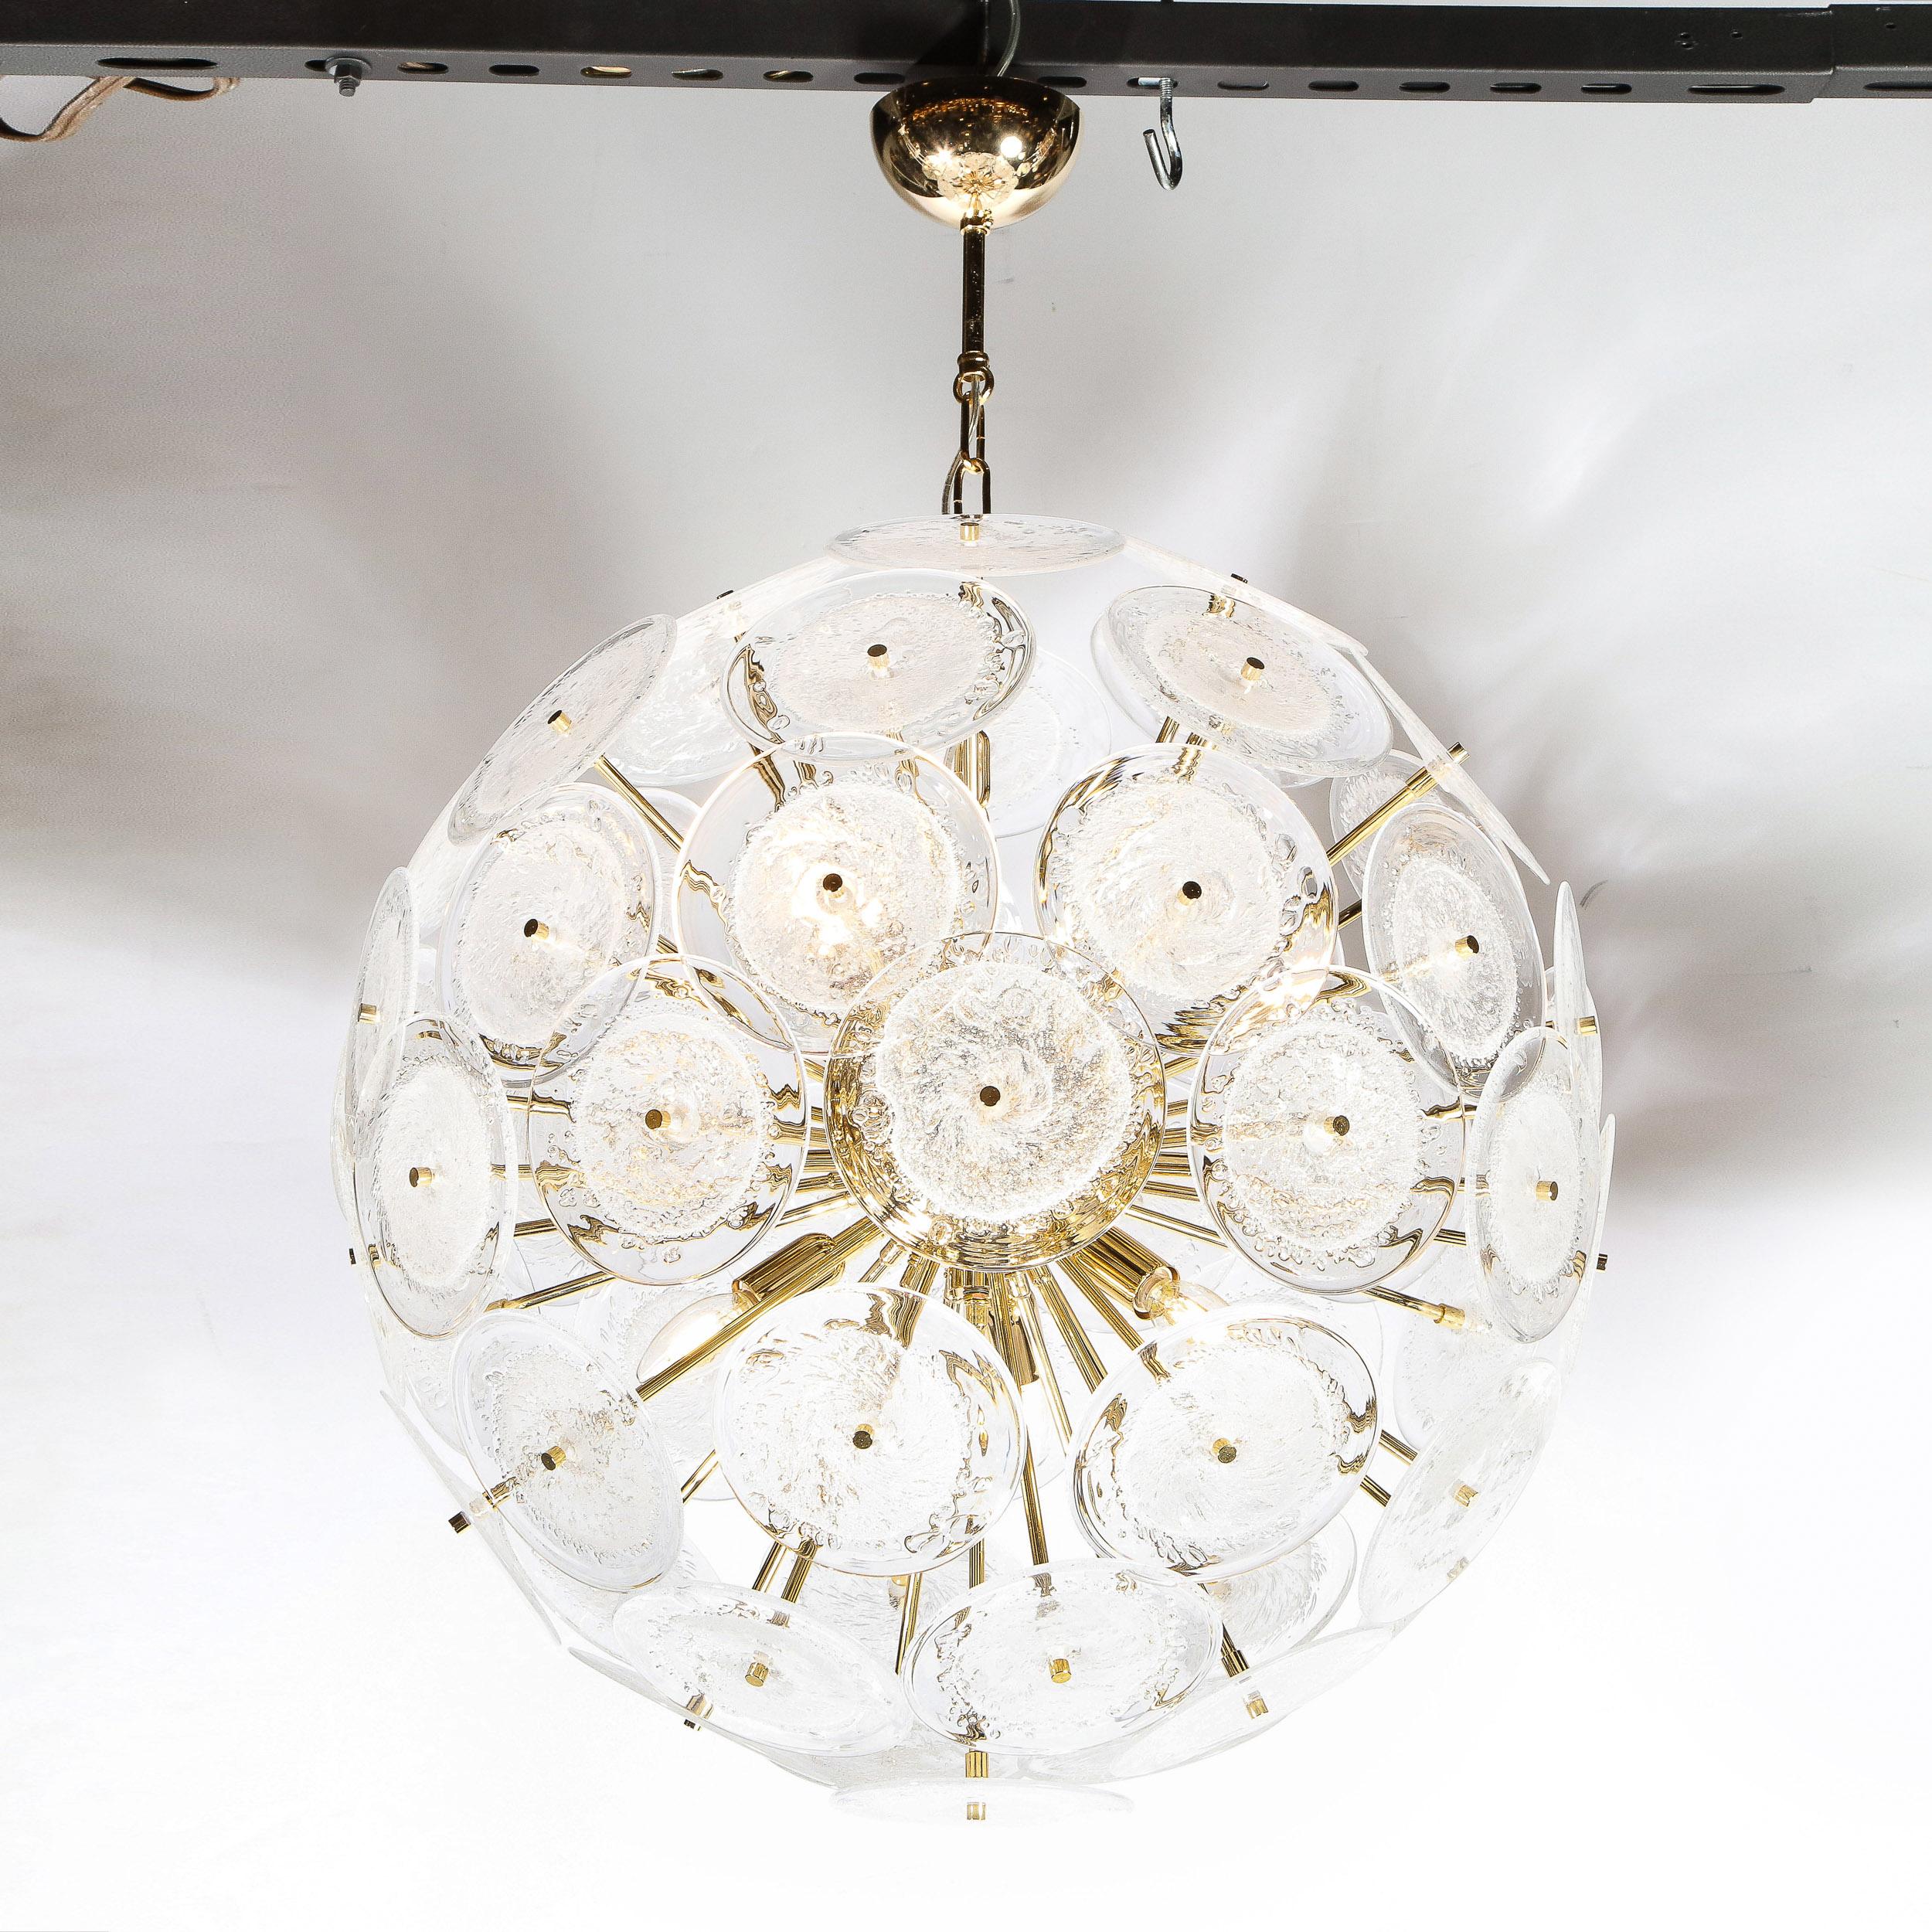 This dramatic and graphic sputnik was realized in Murano, Italy- the islands off the coast of Venice renowned for centuries for their superlative glass production. It features a wealth of polished brass rods emanating from circular body of the same